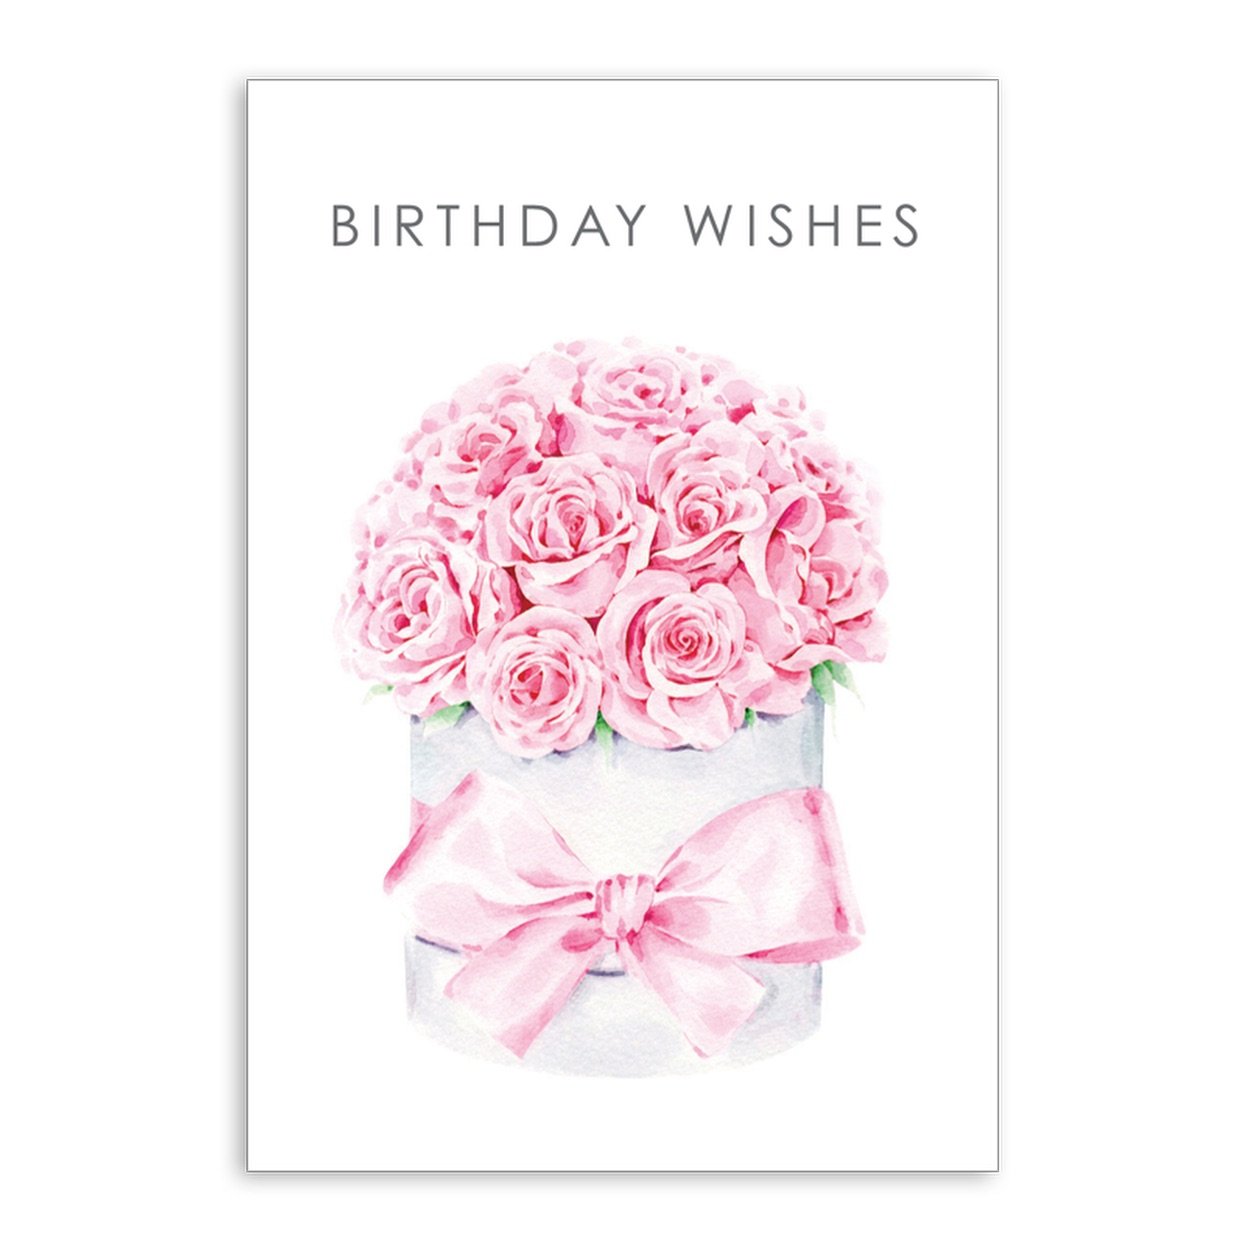 Heavenly Cards - Folded Occasion Cards